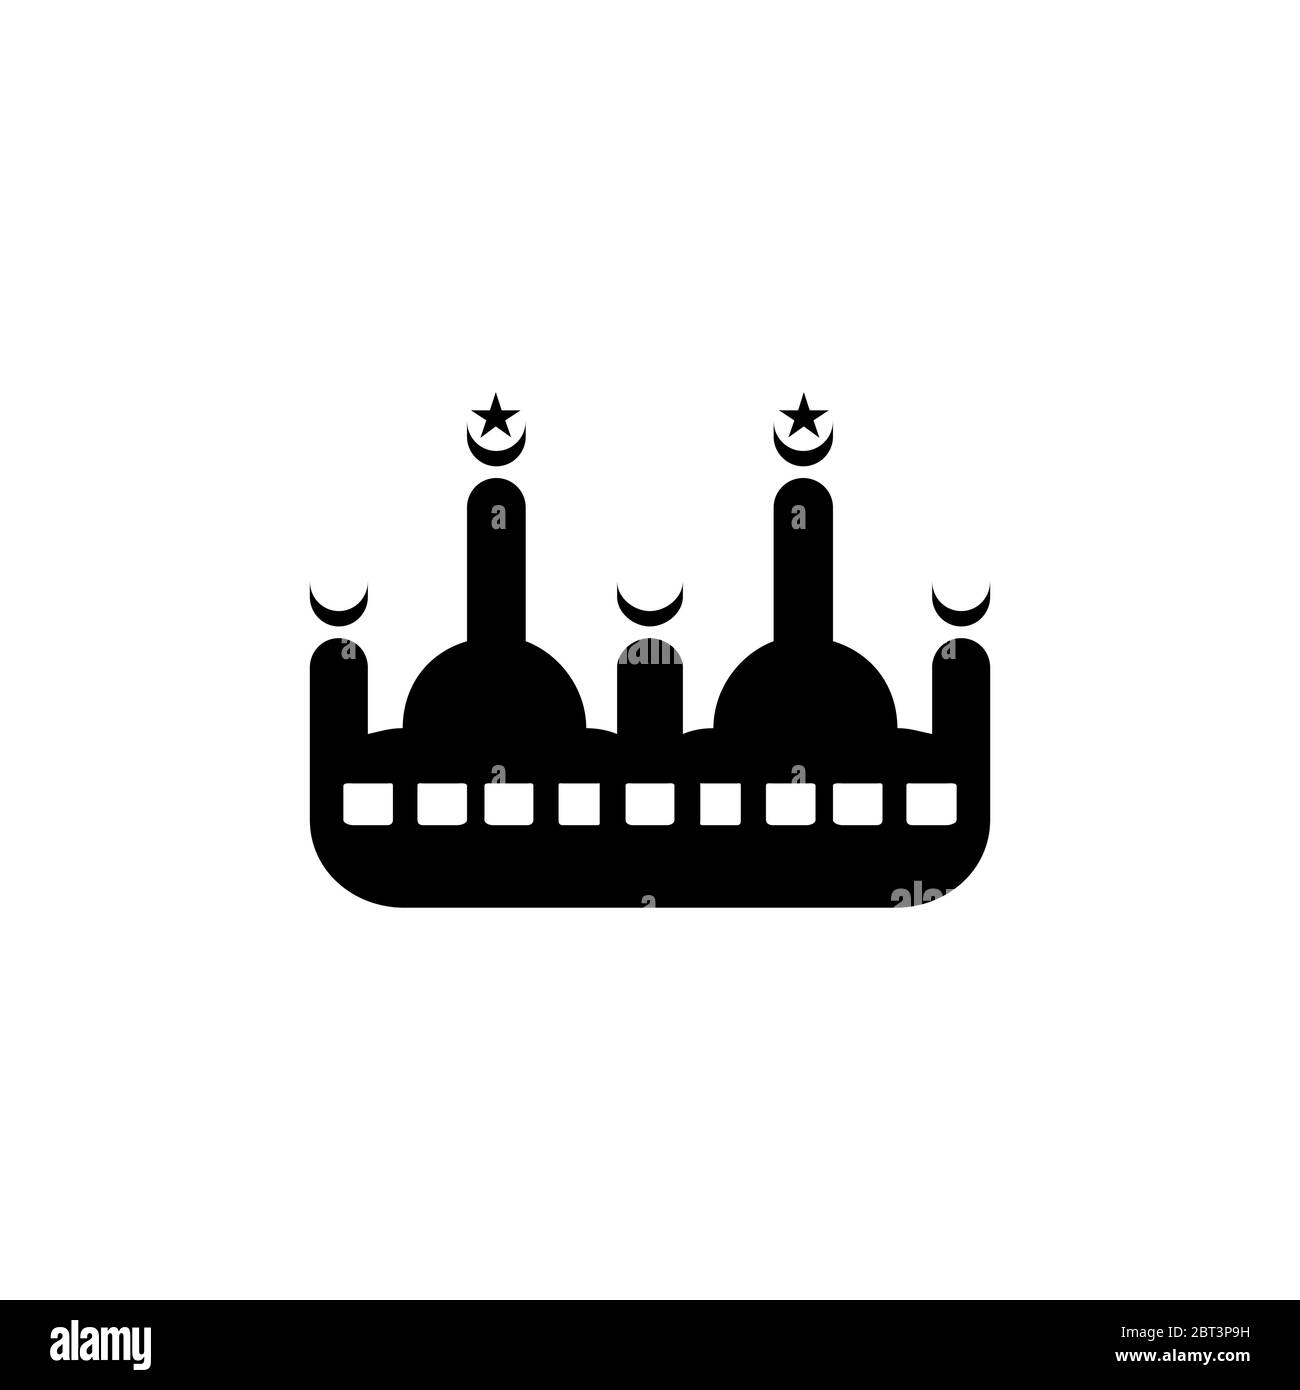 Mosque graphic vector design concept template, isolated on white background. Stock Vector